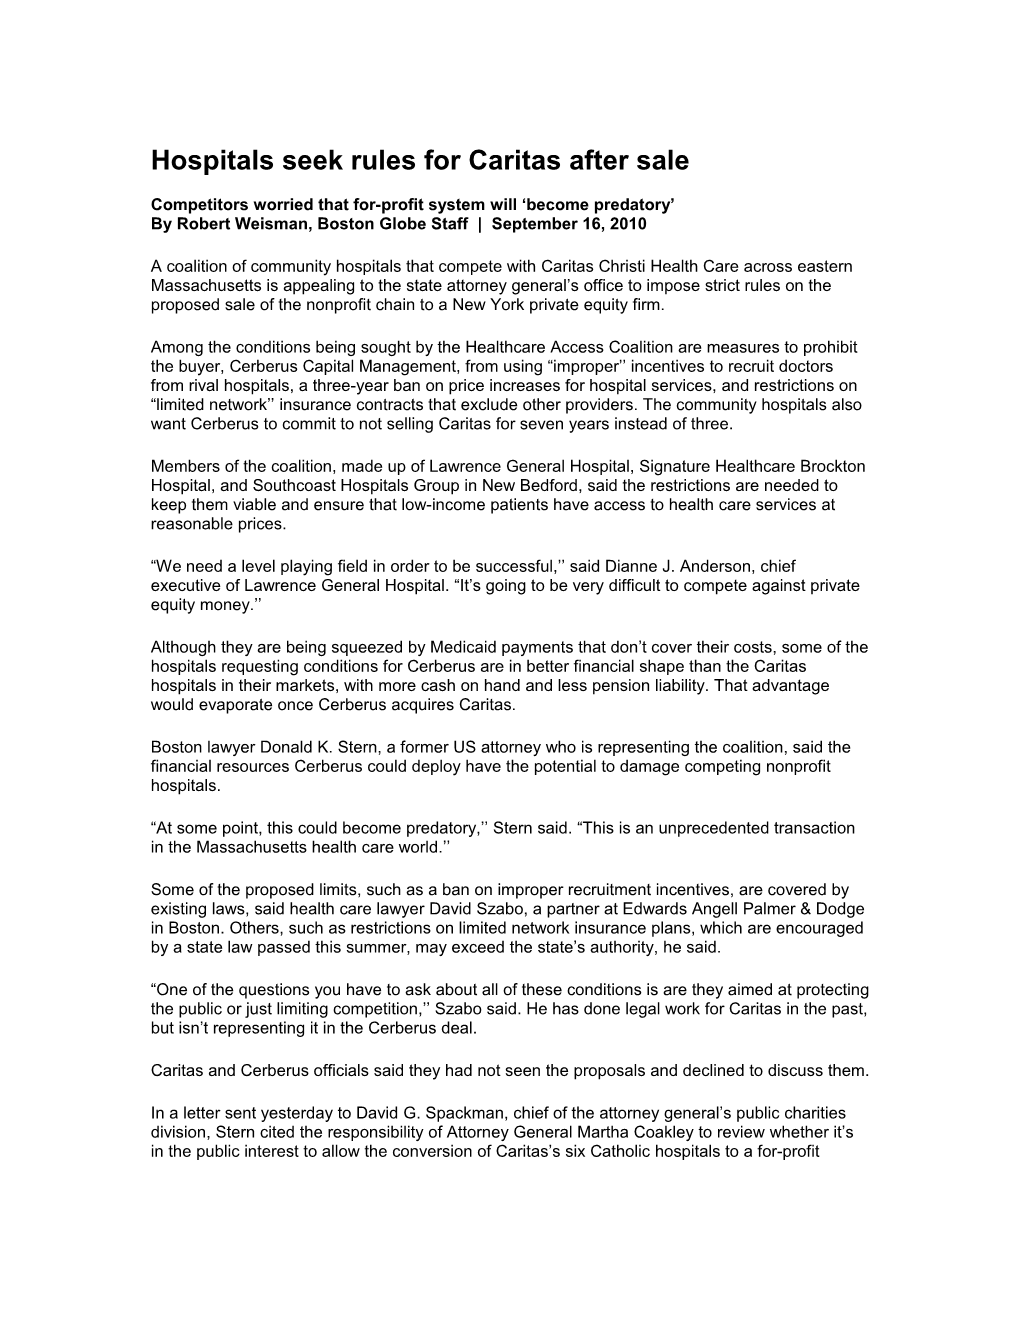 Hospitals Seek Rules for Caritas After Sale